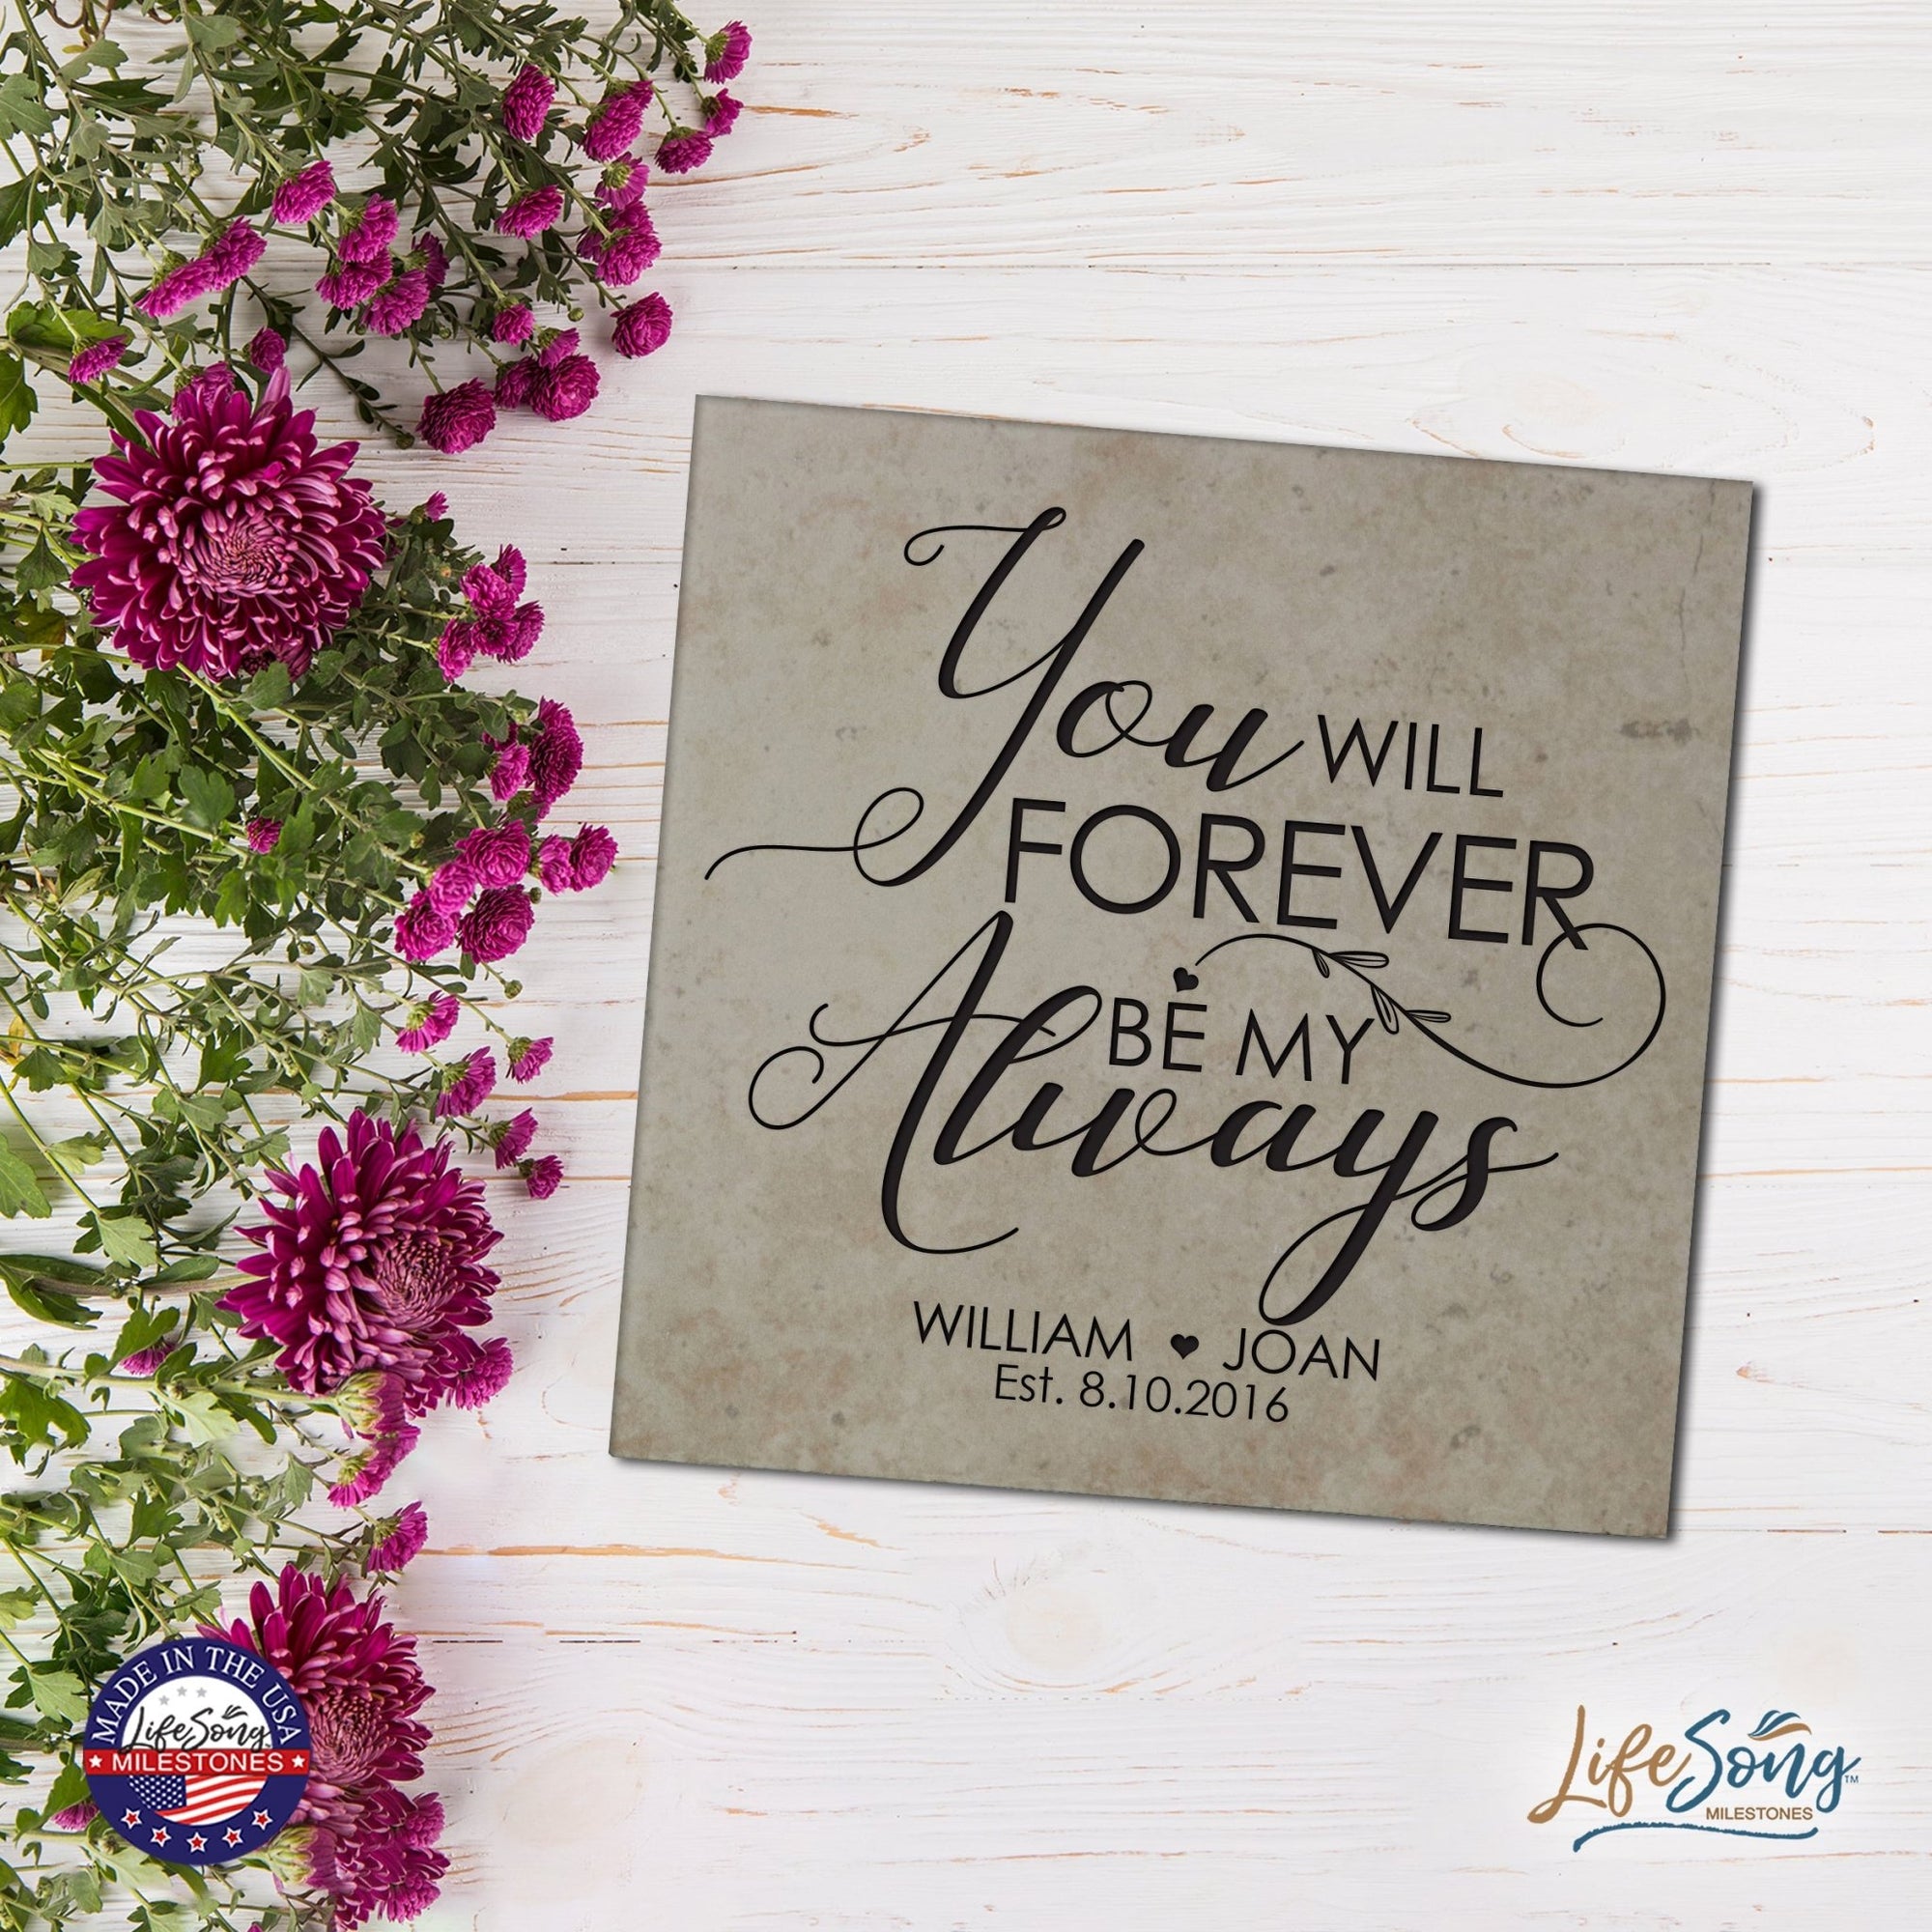 Personalized Ceramic Trivet with Inspirational verse 5.75in (You Will Forever) - LifeSong Milestones